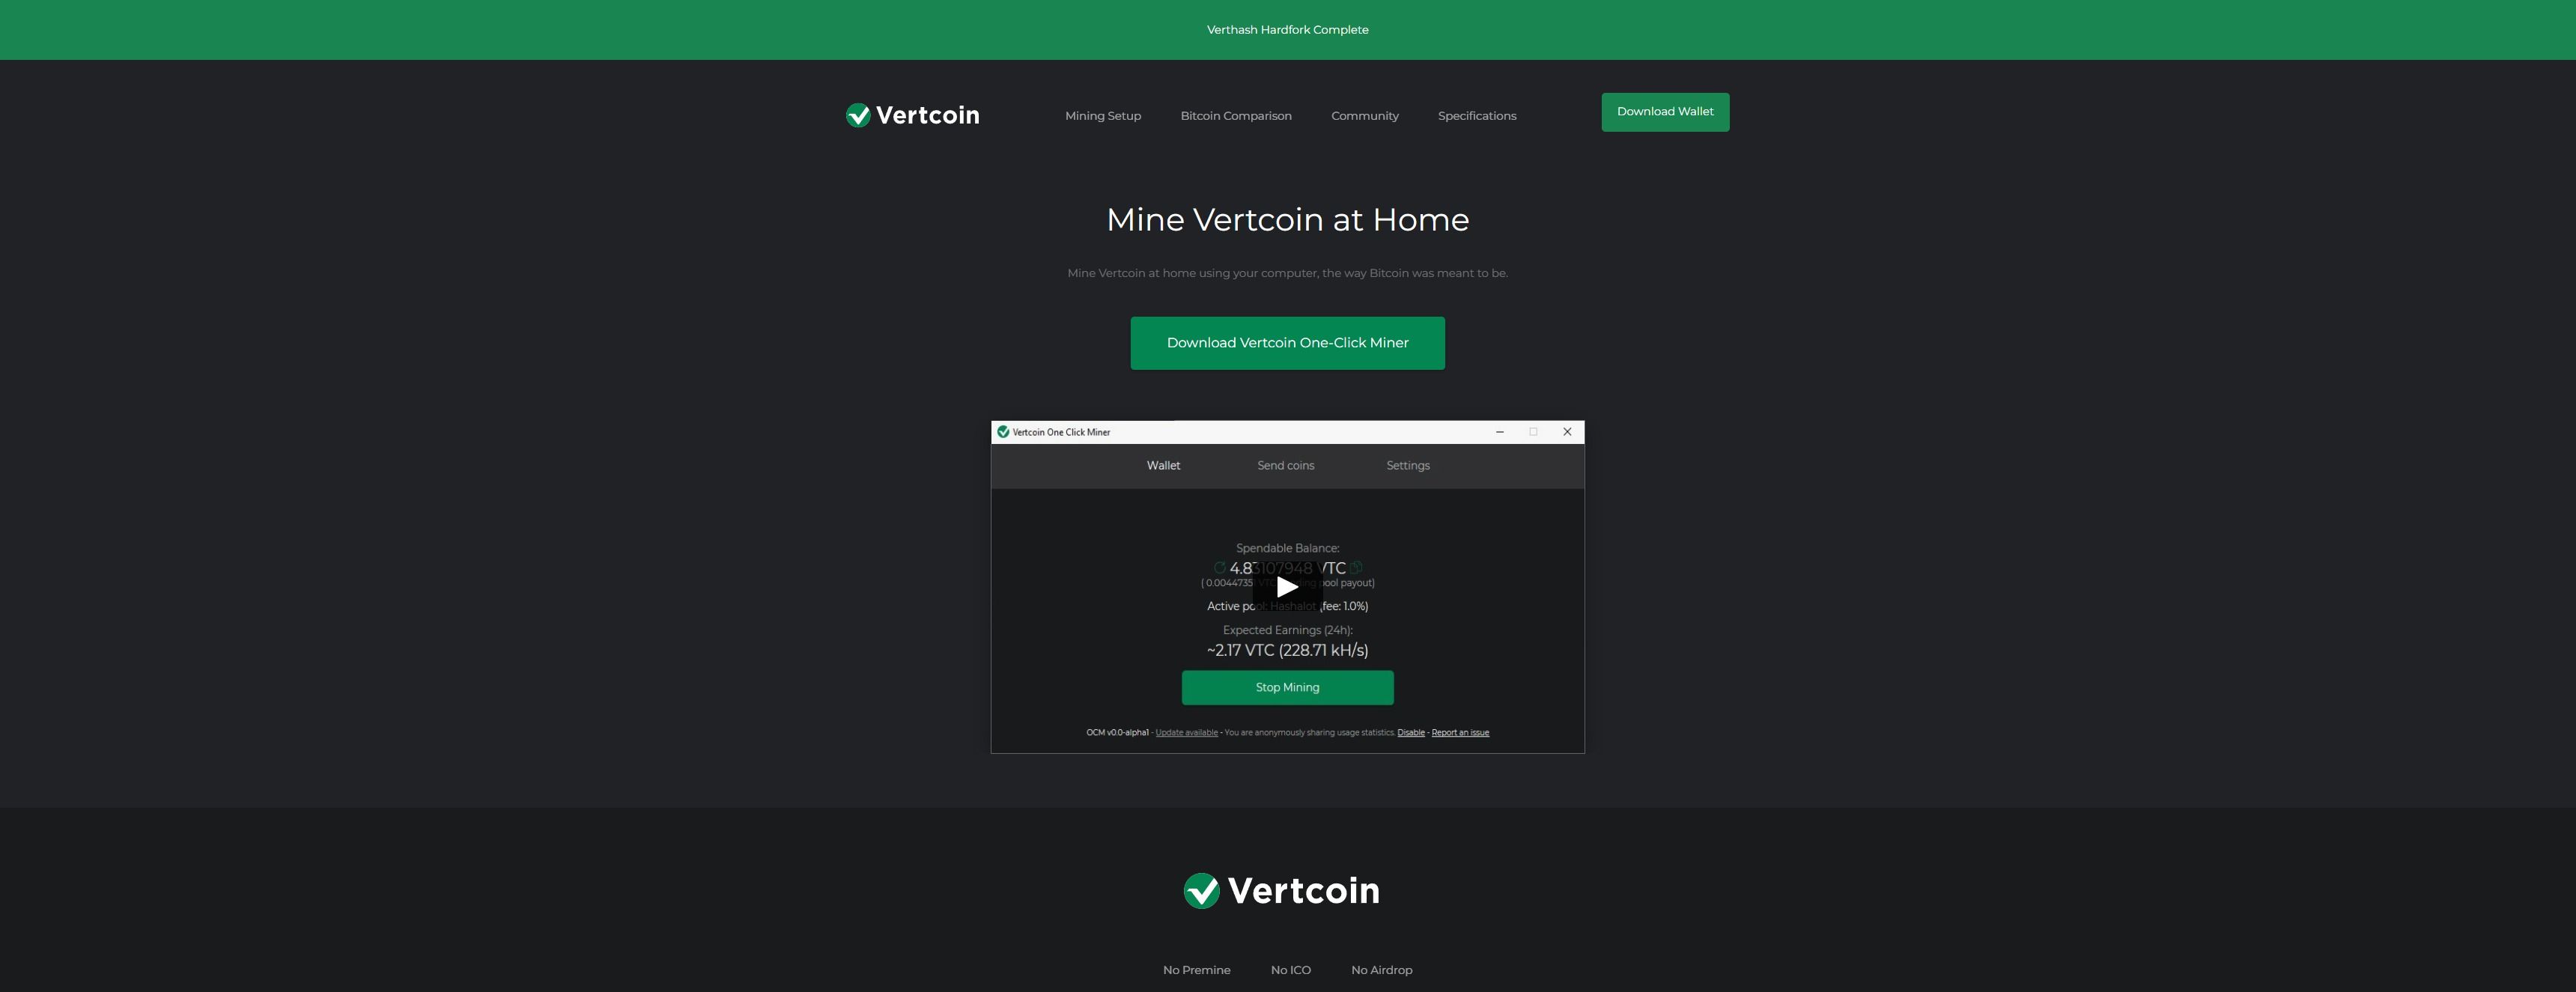 Screenshot of Vertcoin's home page